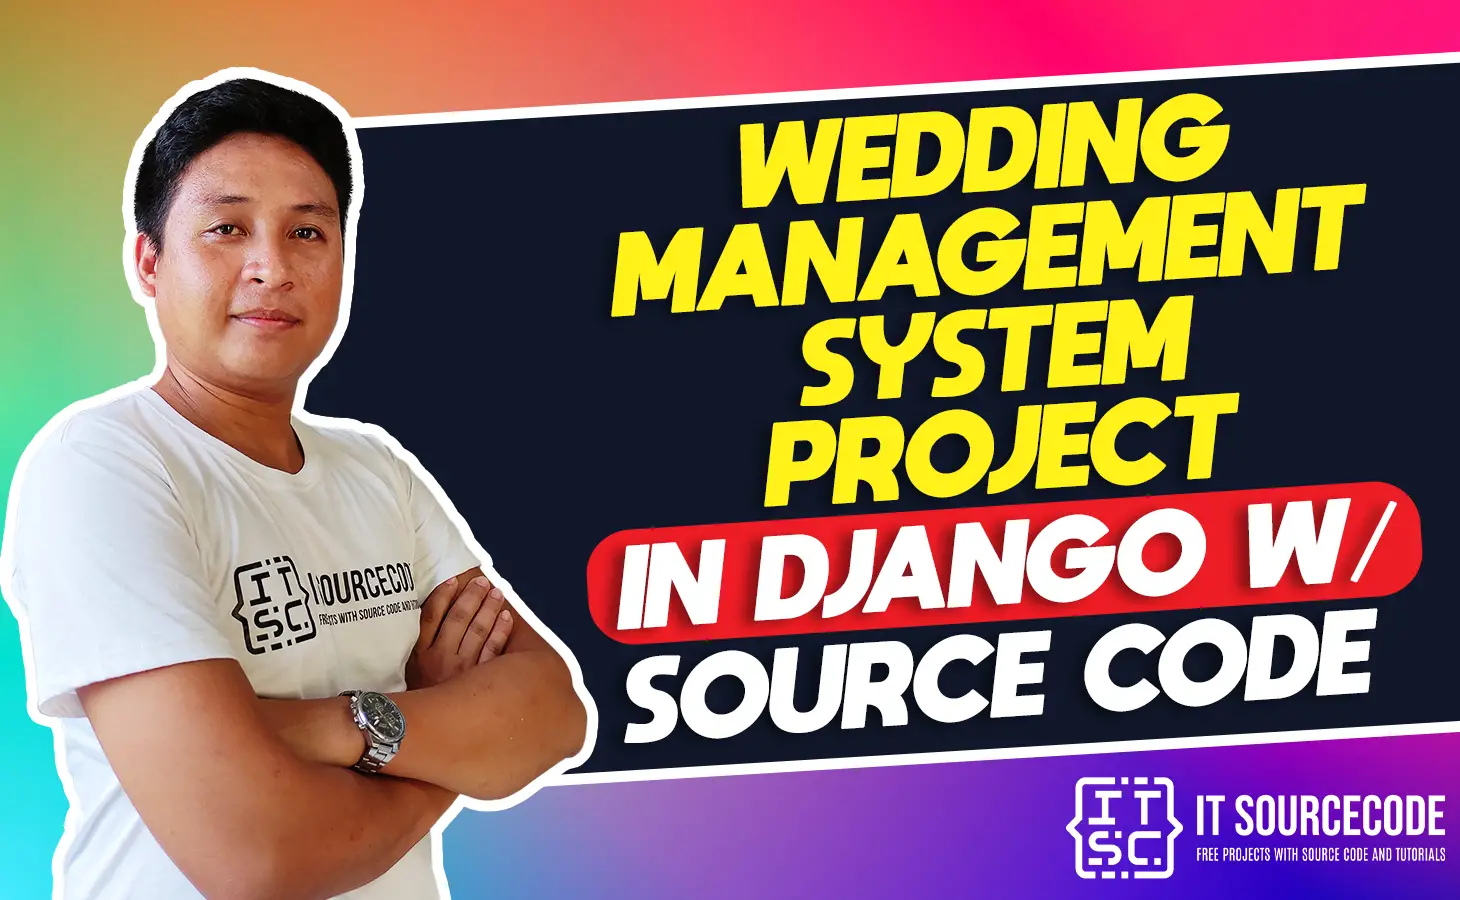 Wedding Management System Project in Django with Source Code